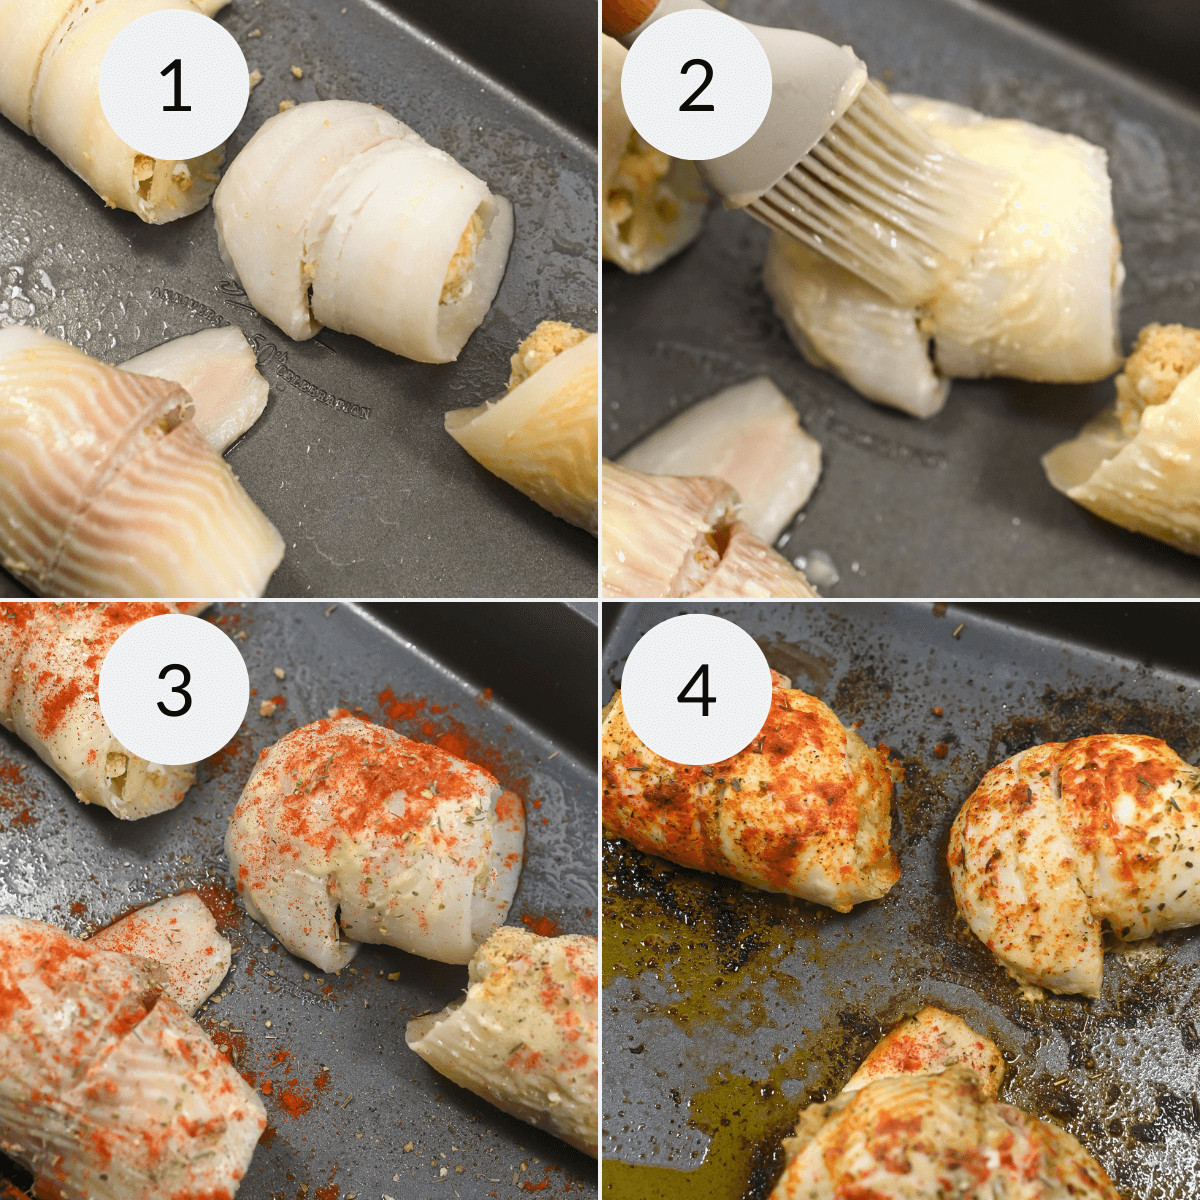 Step-by-step preparation of seasoned fish fillets with crabmeat stuffing on a baking tray.